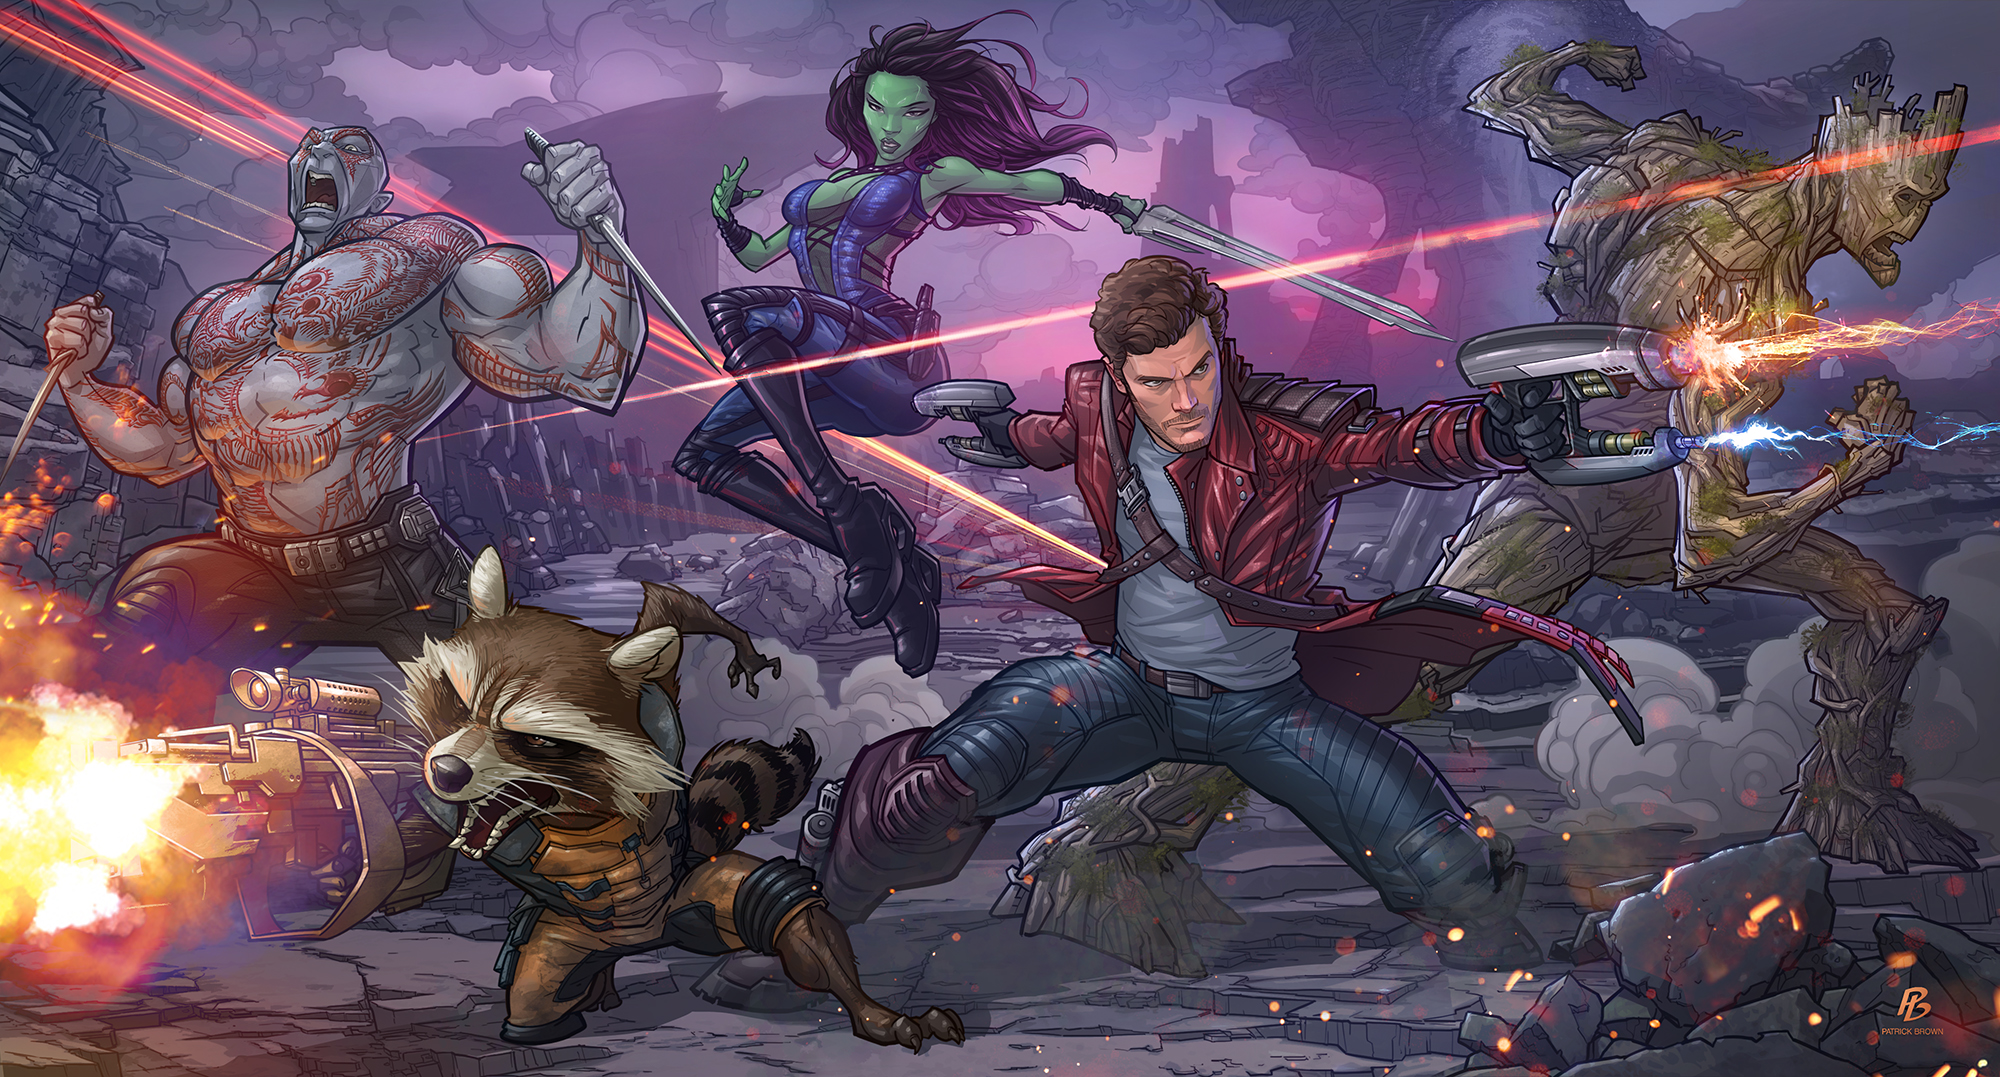 Guardians of the Galaxy by P. Brown